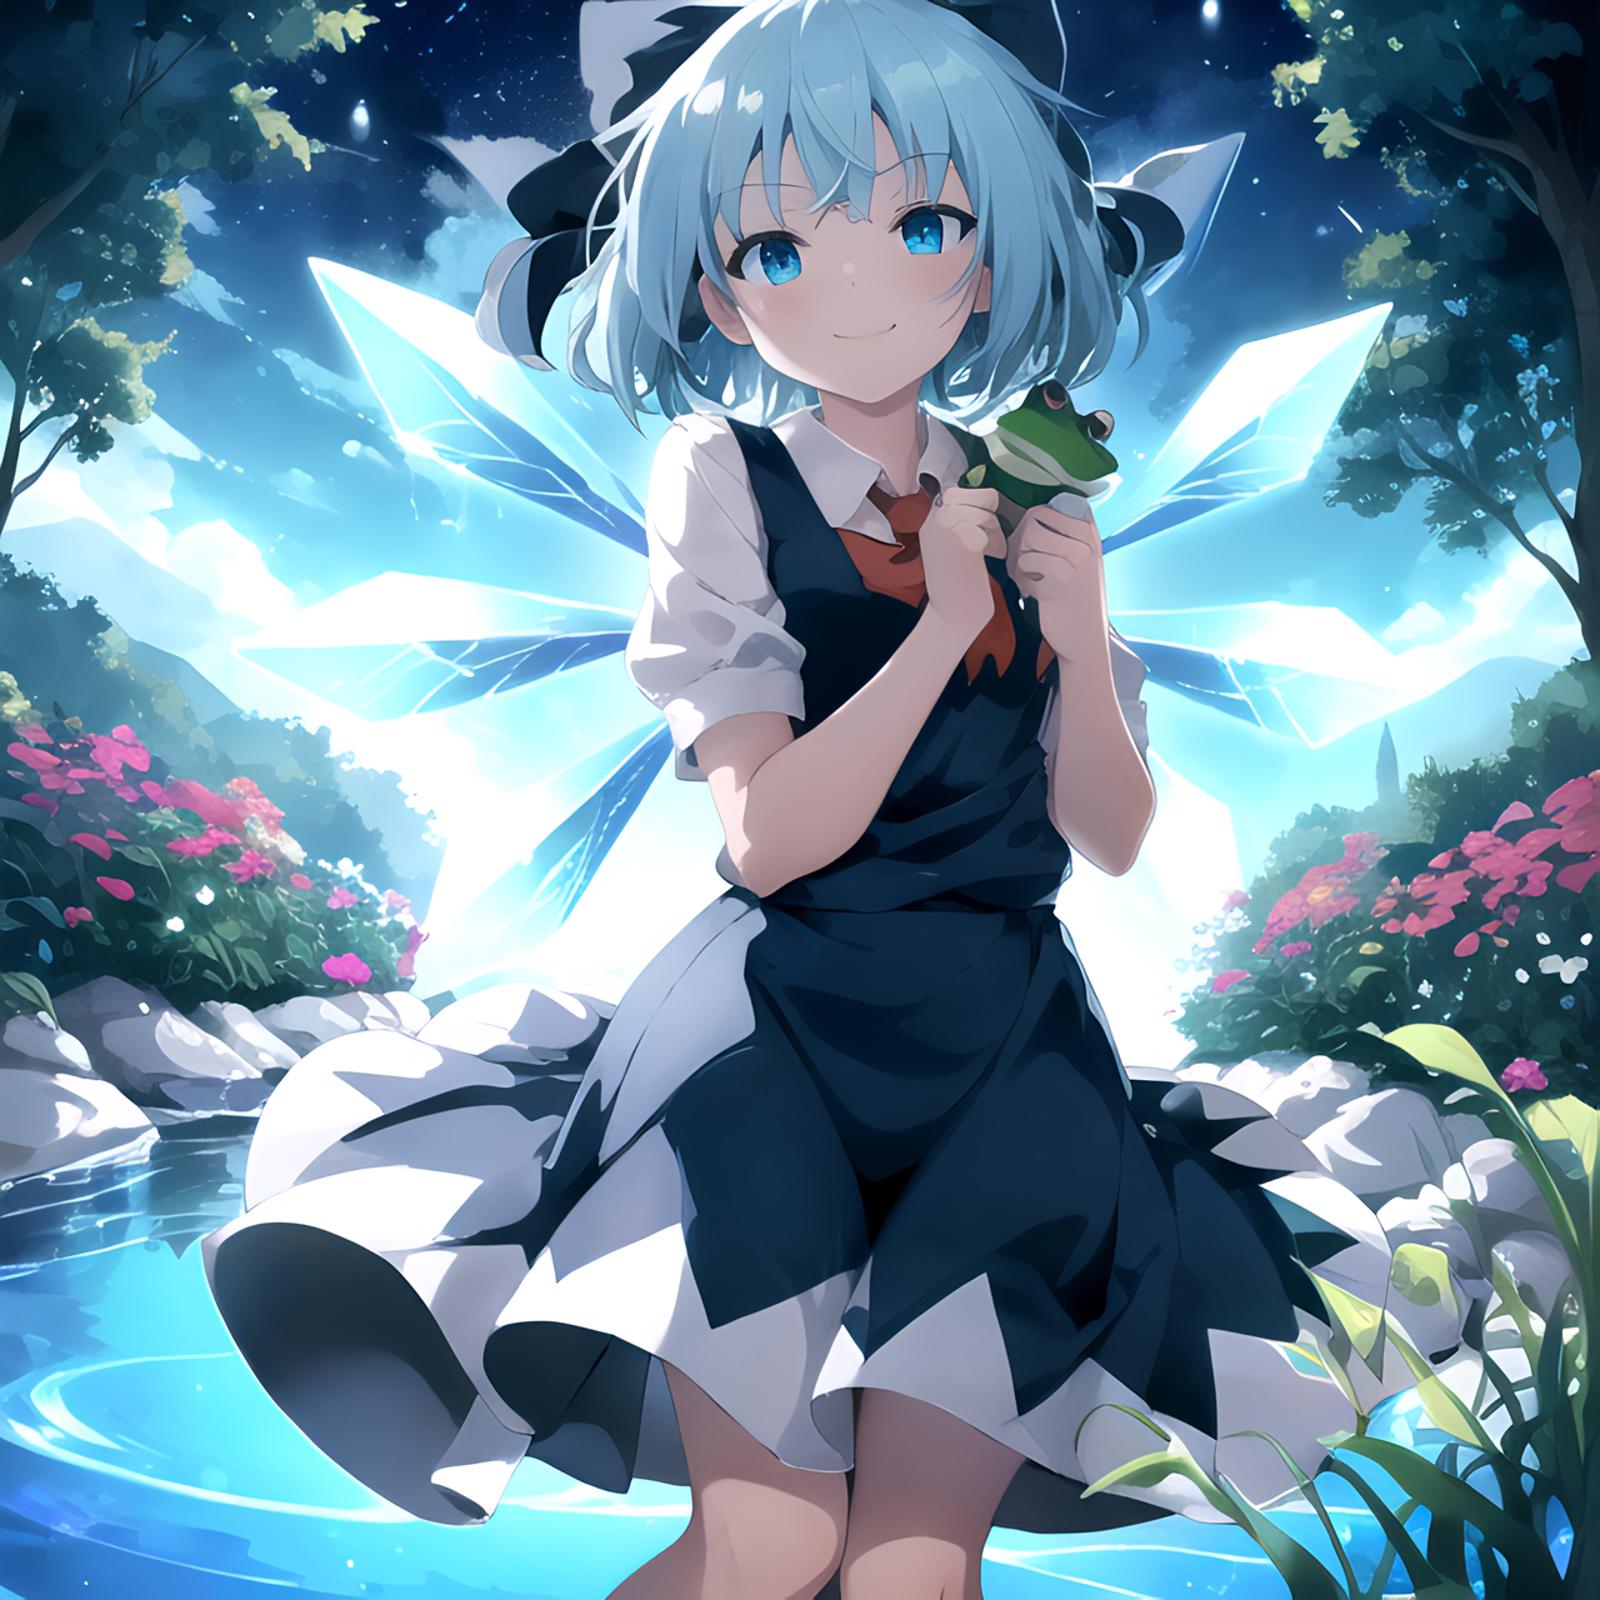 Do 4-rt's  Cirno image by conquestace